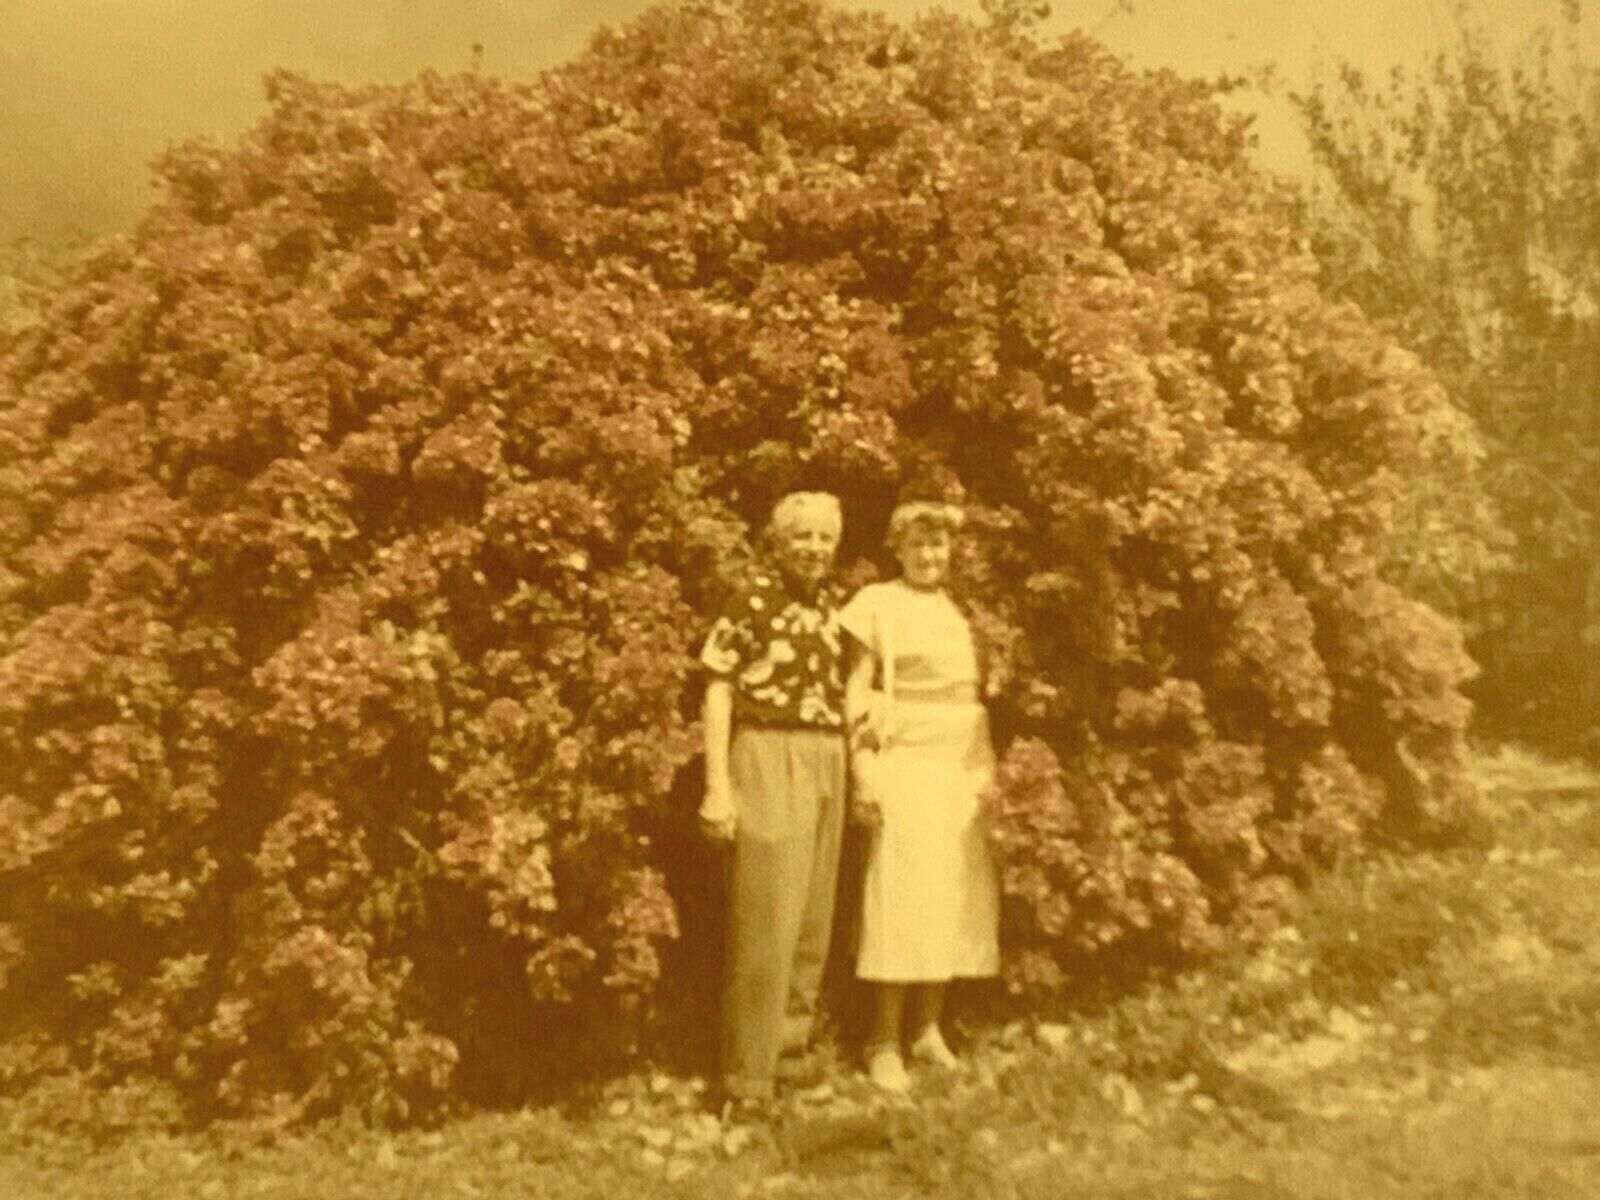 AwD) Found Photo Photograph 1950 Old Couple Posing Large Flowering Bush Artistic